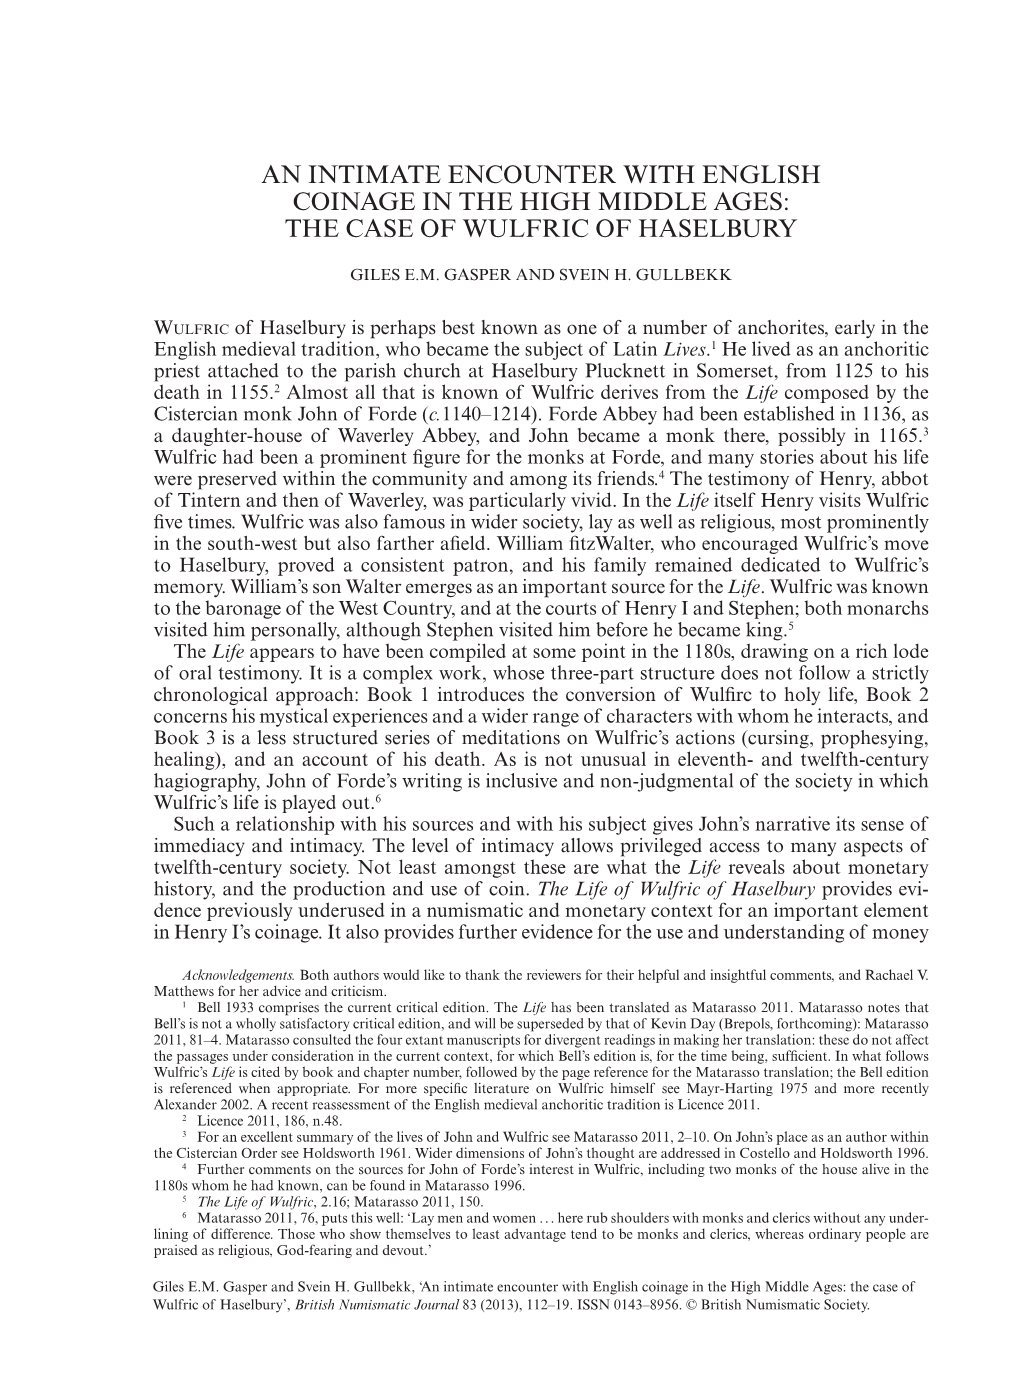 An Intimate Encounter with English Coinage in the High Middle Ages: the Case of Wulfric of Haselbury